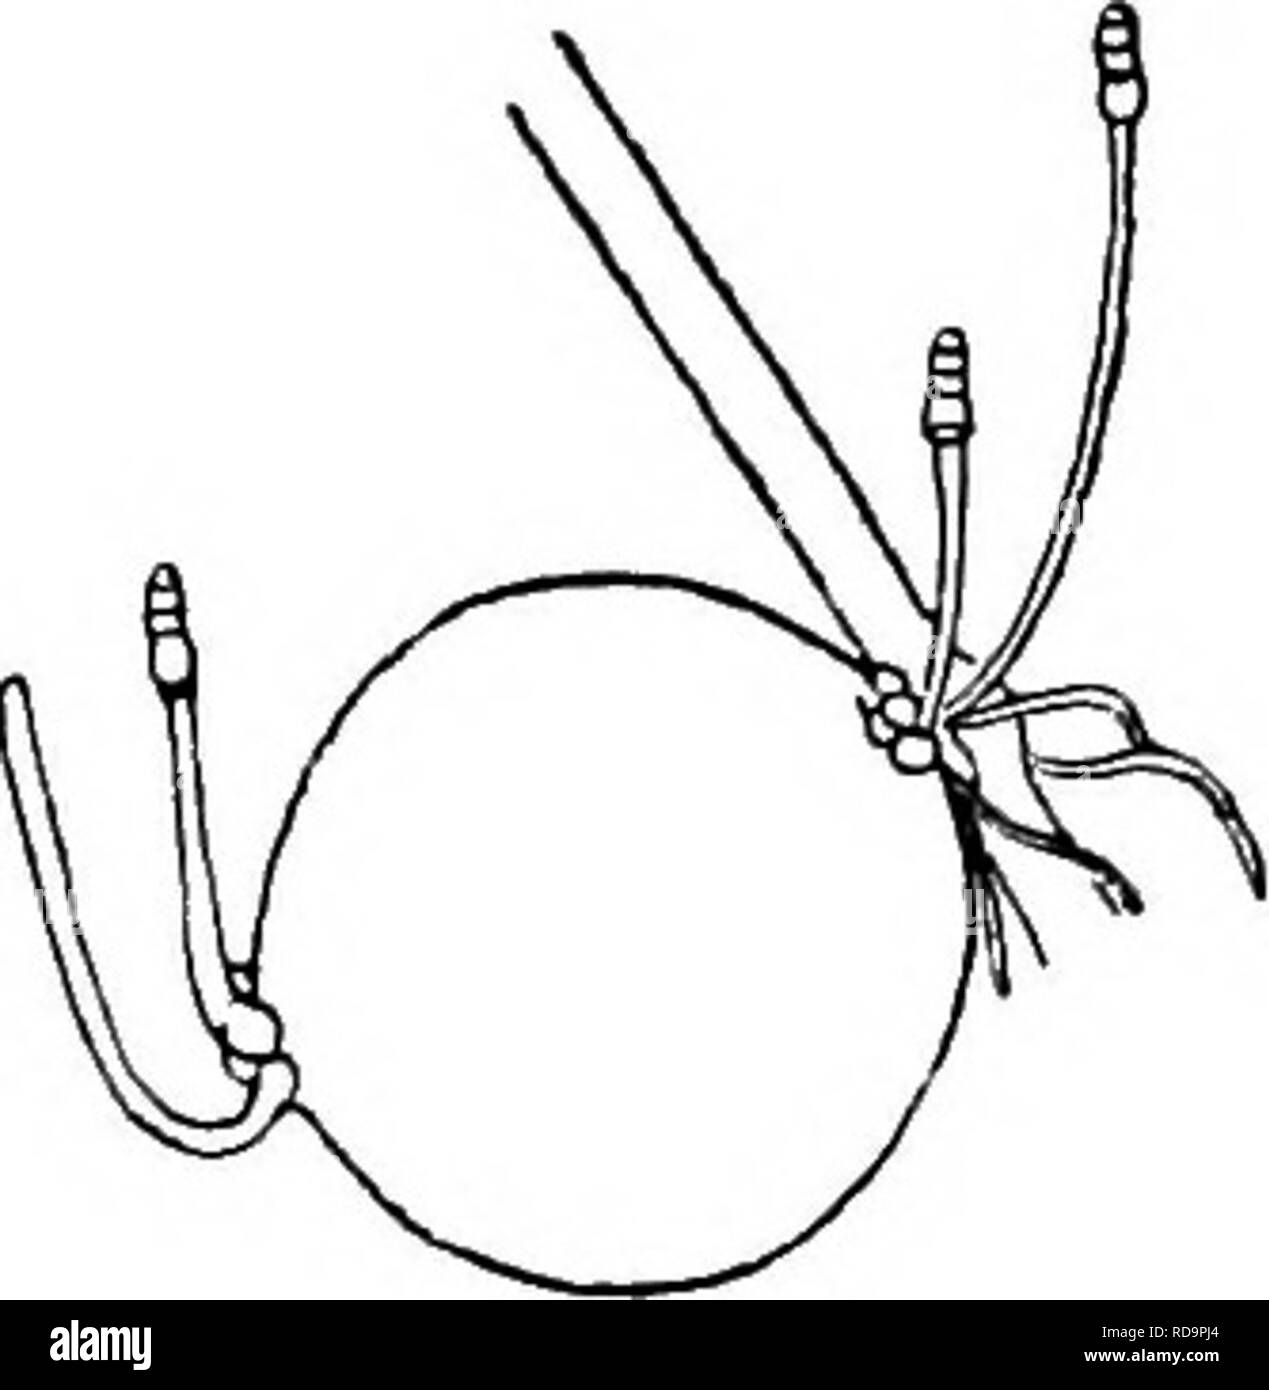 . The British Charophyta. Characeae. Fio. 11.—Root-bulbils (spherical type) of Chara aspera (after Giesenhagen). i. Root-node showing double-footed joint with three bulbils, two nearly spherical, and one cylindrical; also some rhizoids ( x c. 11). ii. Eoot-node bearing one spherical bulbil, with young plants arising from nodes at basal and distal ends ( x c. 13). Charophyte throughout the year either in its natural condition or in cultivation will do well to examine the roots from time to time to ascertain if bulbils are being produced. There are three distinct types of bulbil: (1) con- sistin Stock Photo